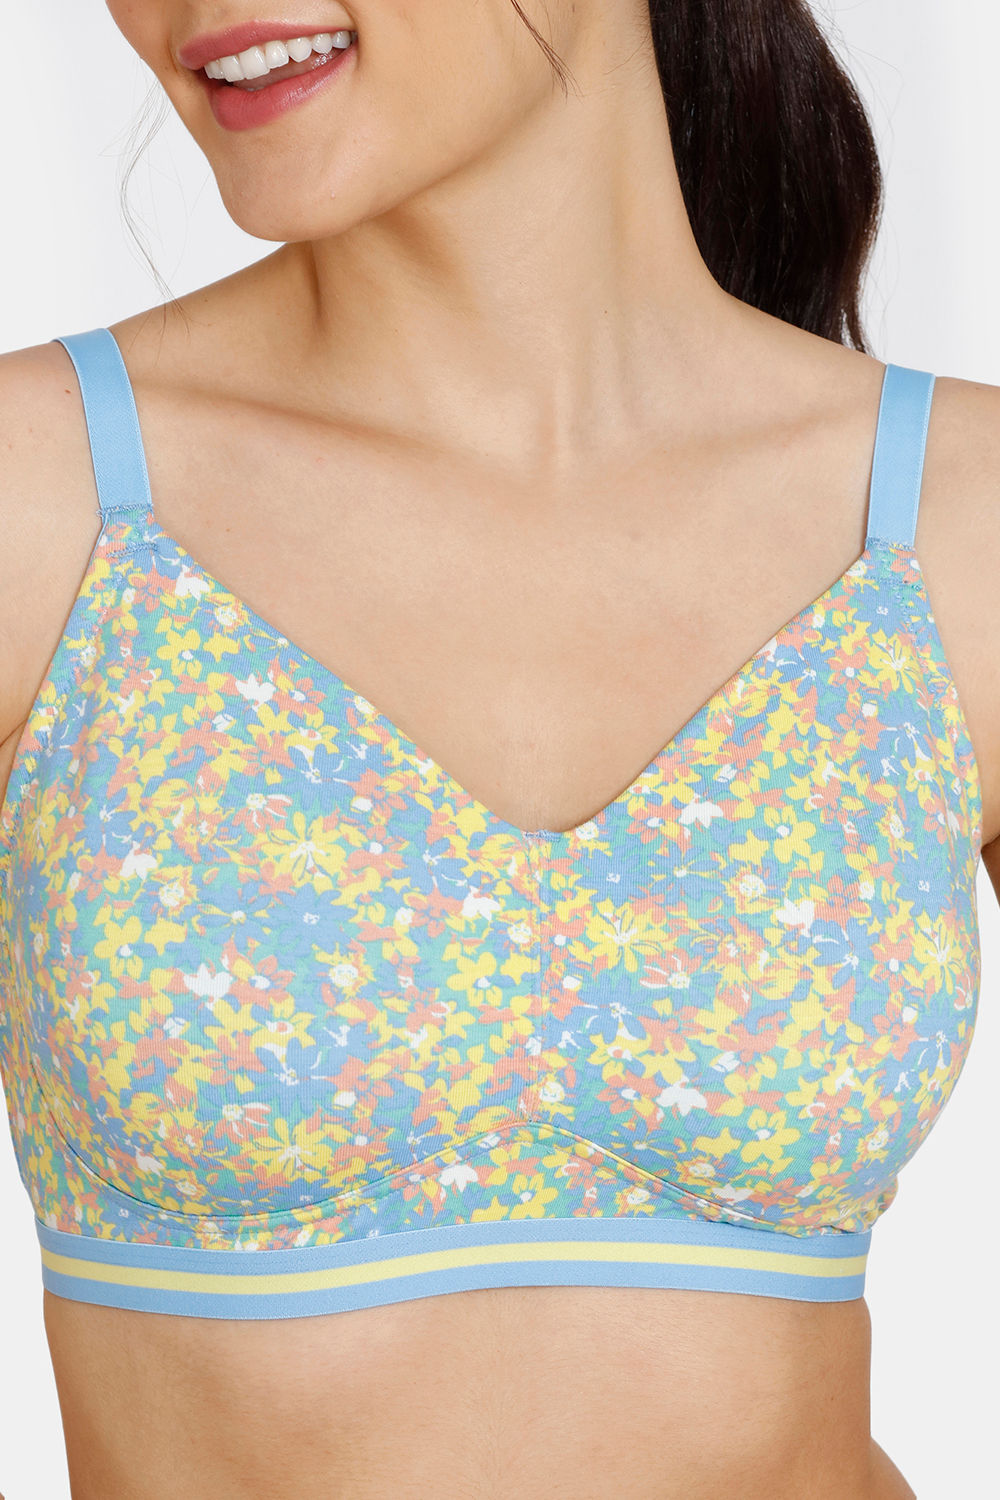 Buy Zivame Desi Kitsch Double Layered Non Wired 3-4Th Coverage Maternity Bra  - Mellow Yellow online